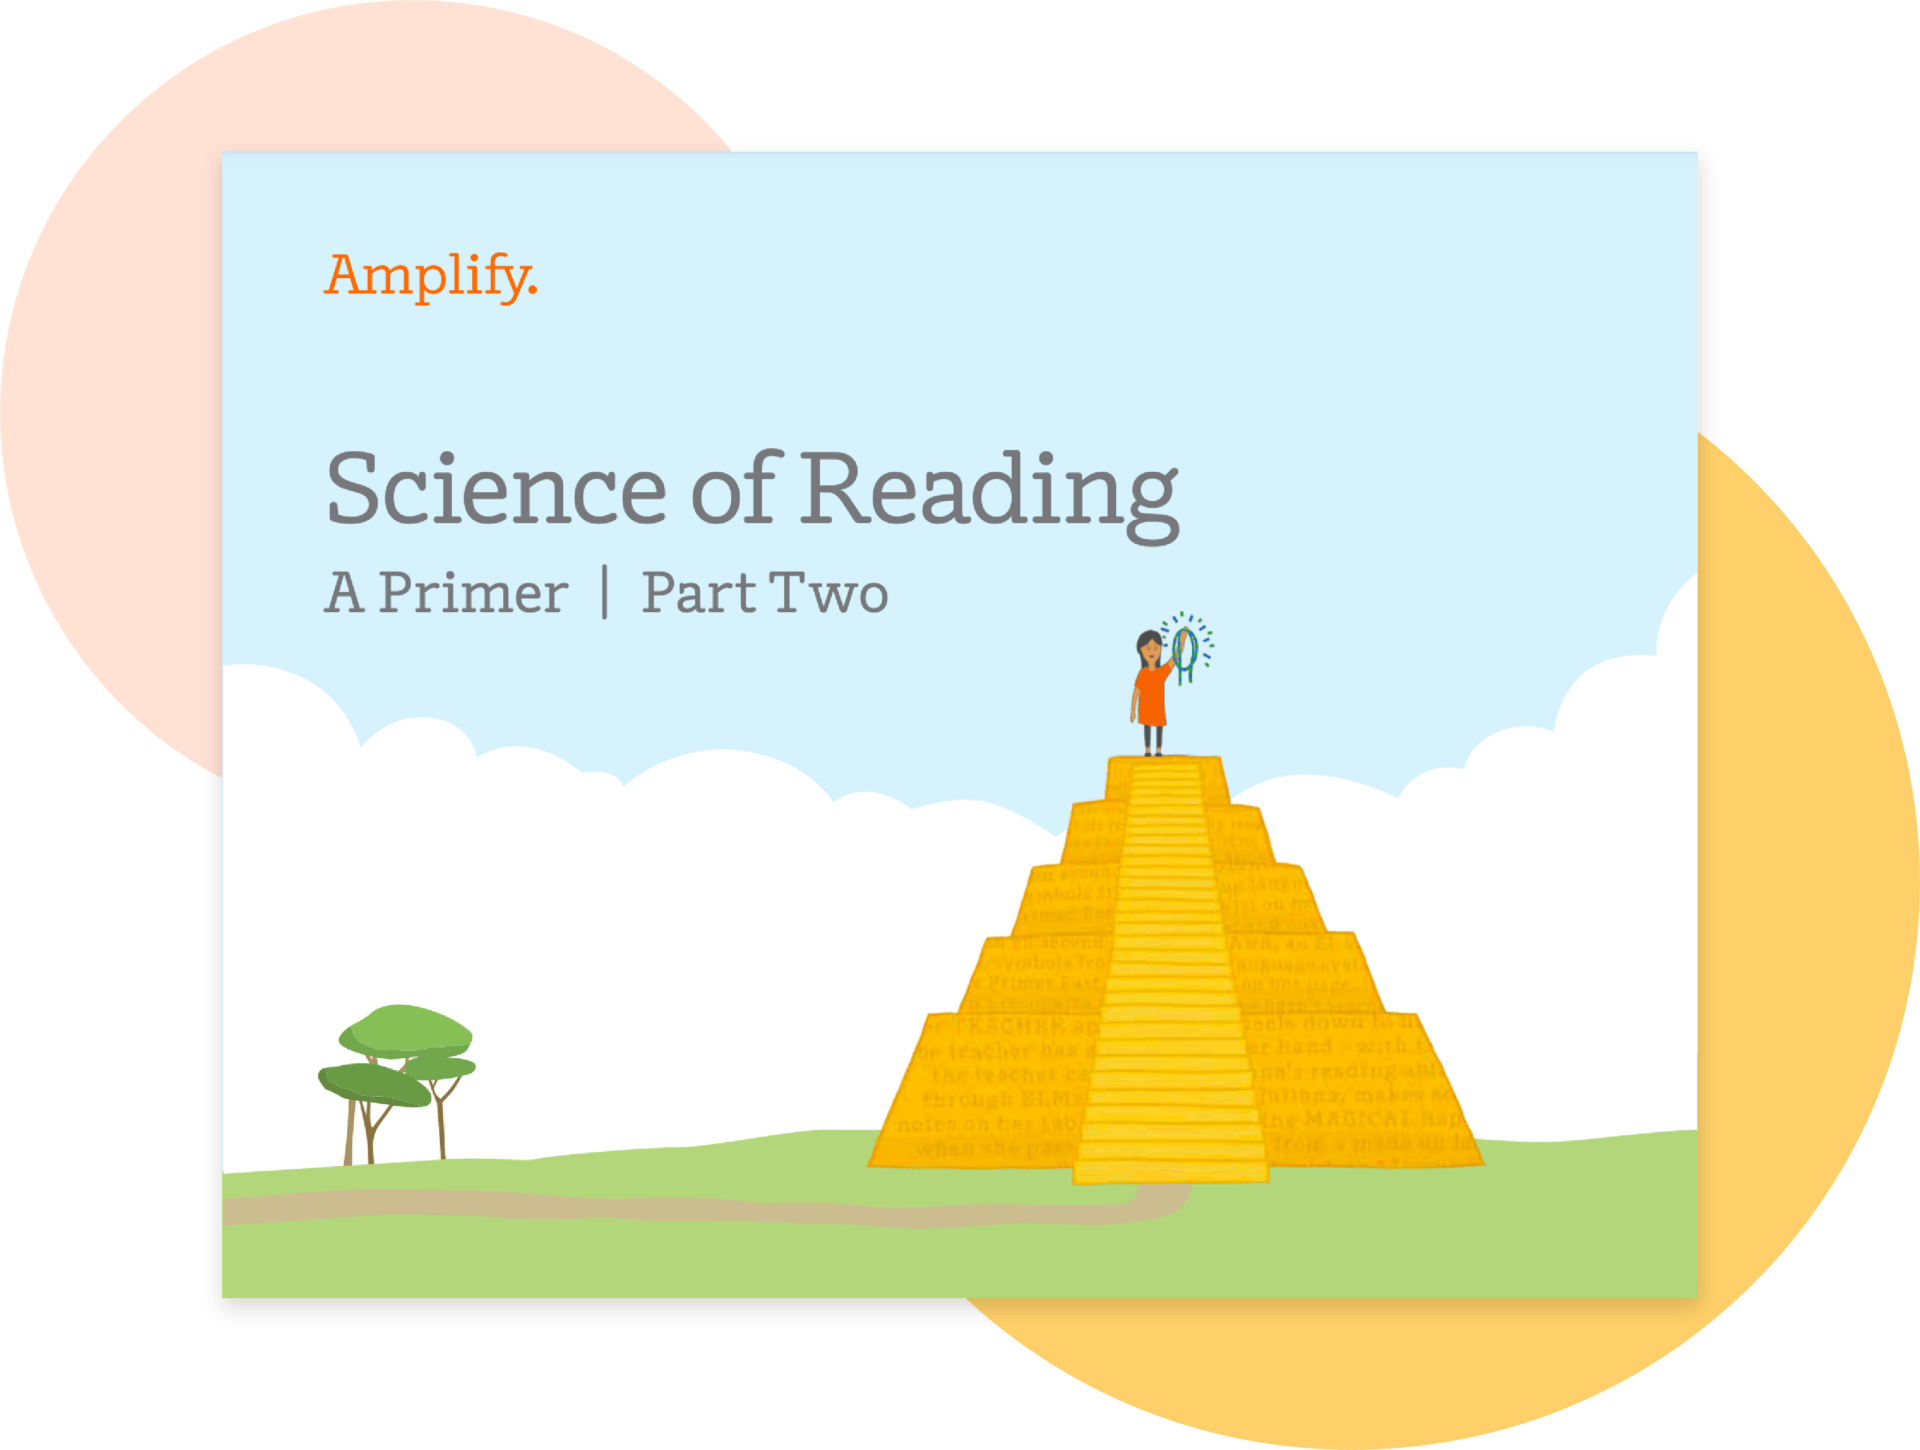 Illustration of a person standing on top of a pyramid with a book, labeled 